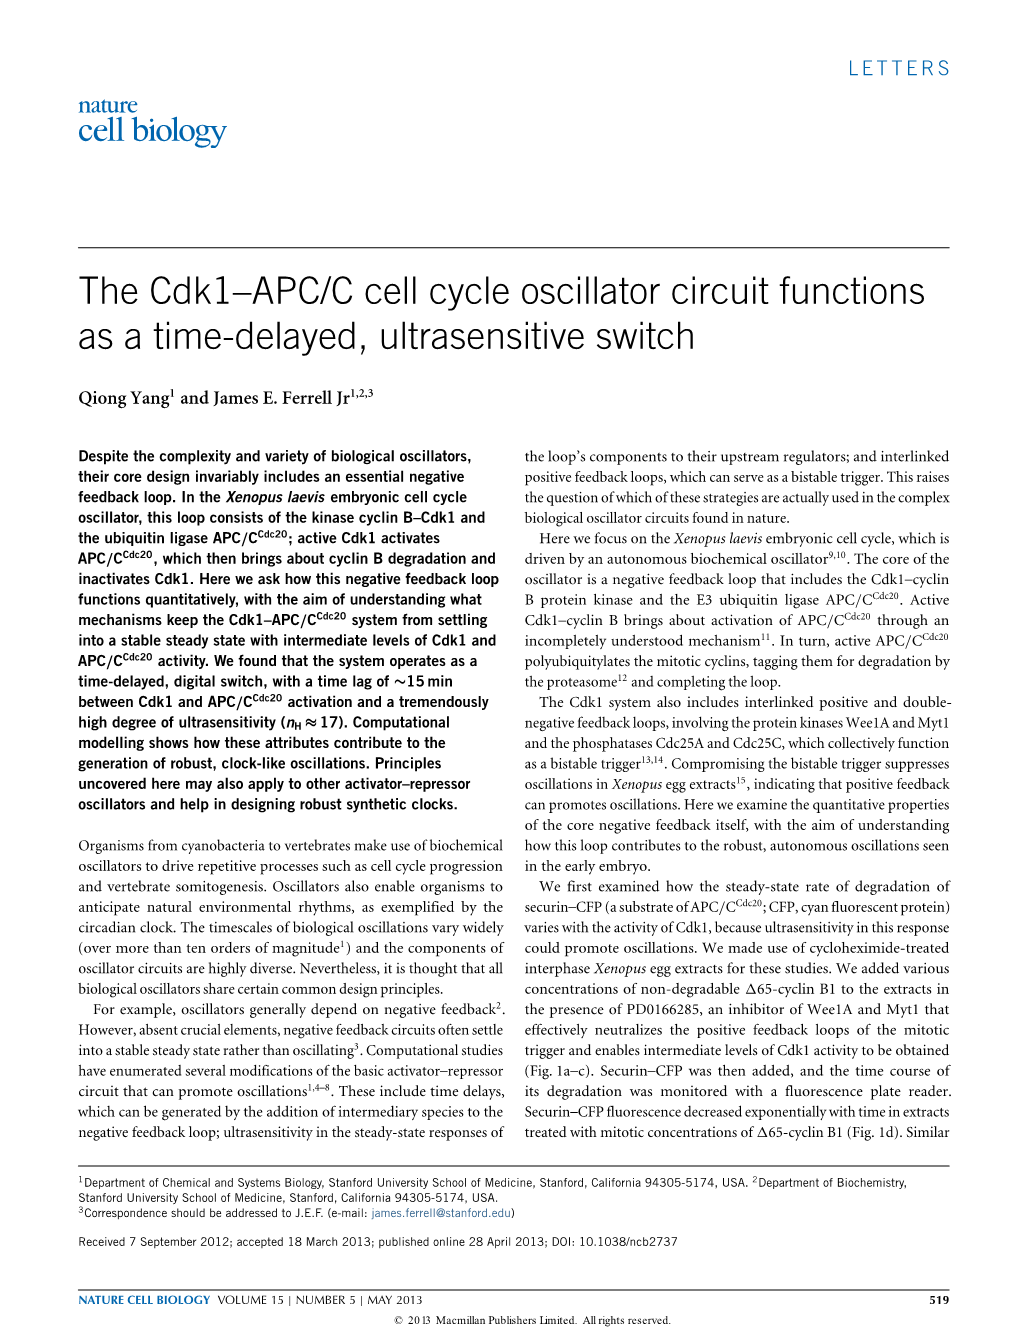 The Cdk1--APC/C Cell Cycle Oscillator Circuit Functions As a Time-Delayed